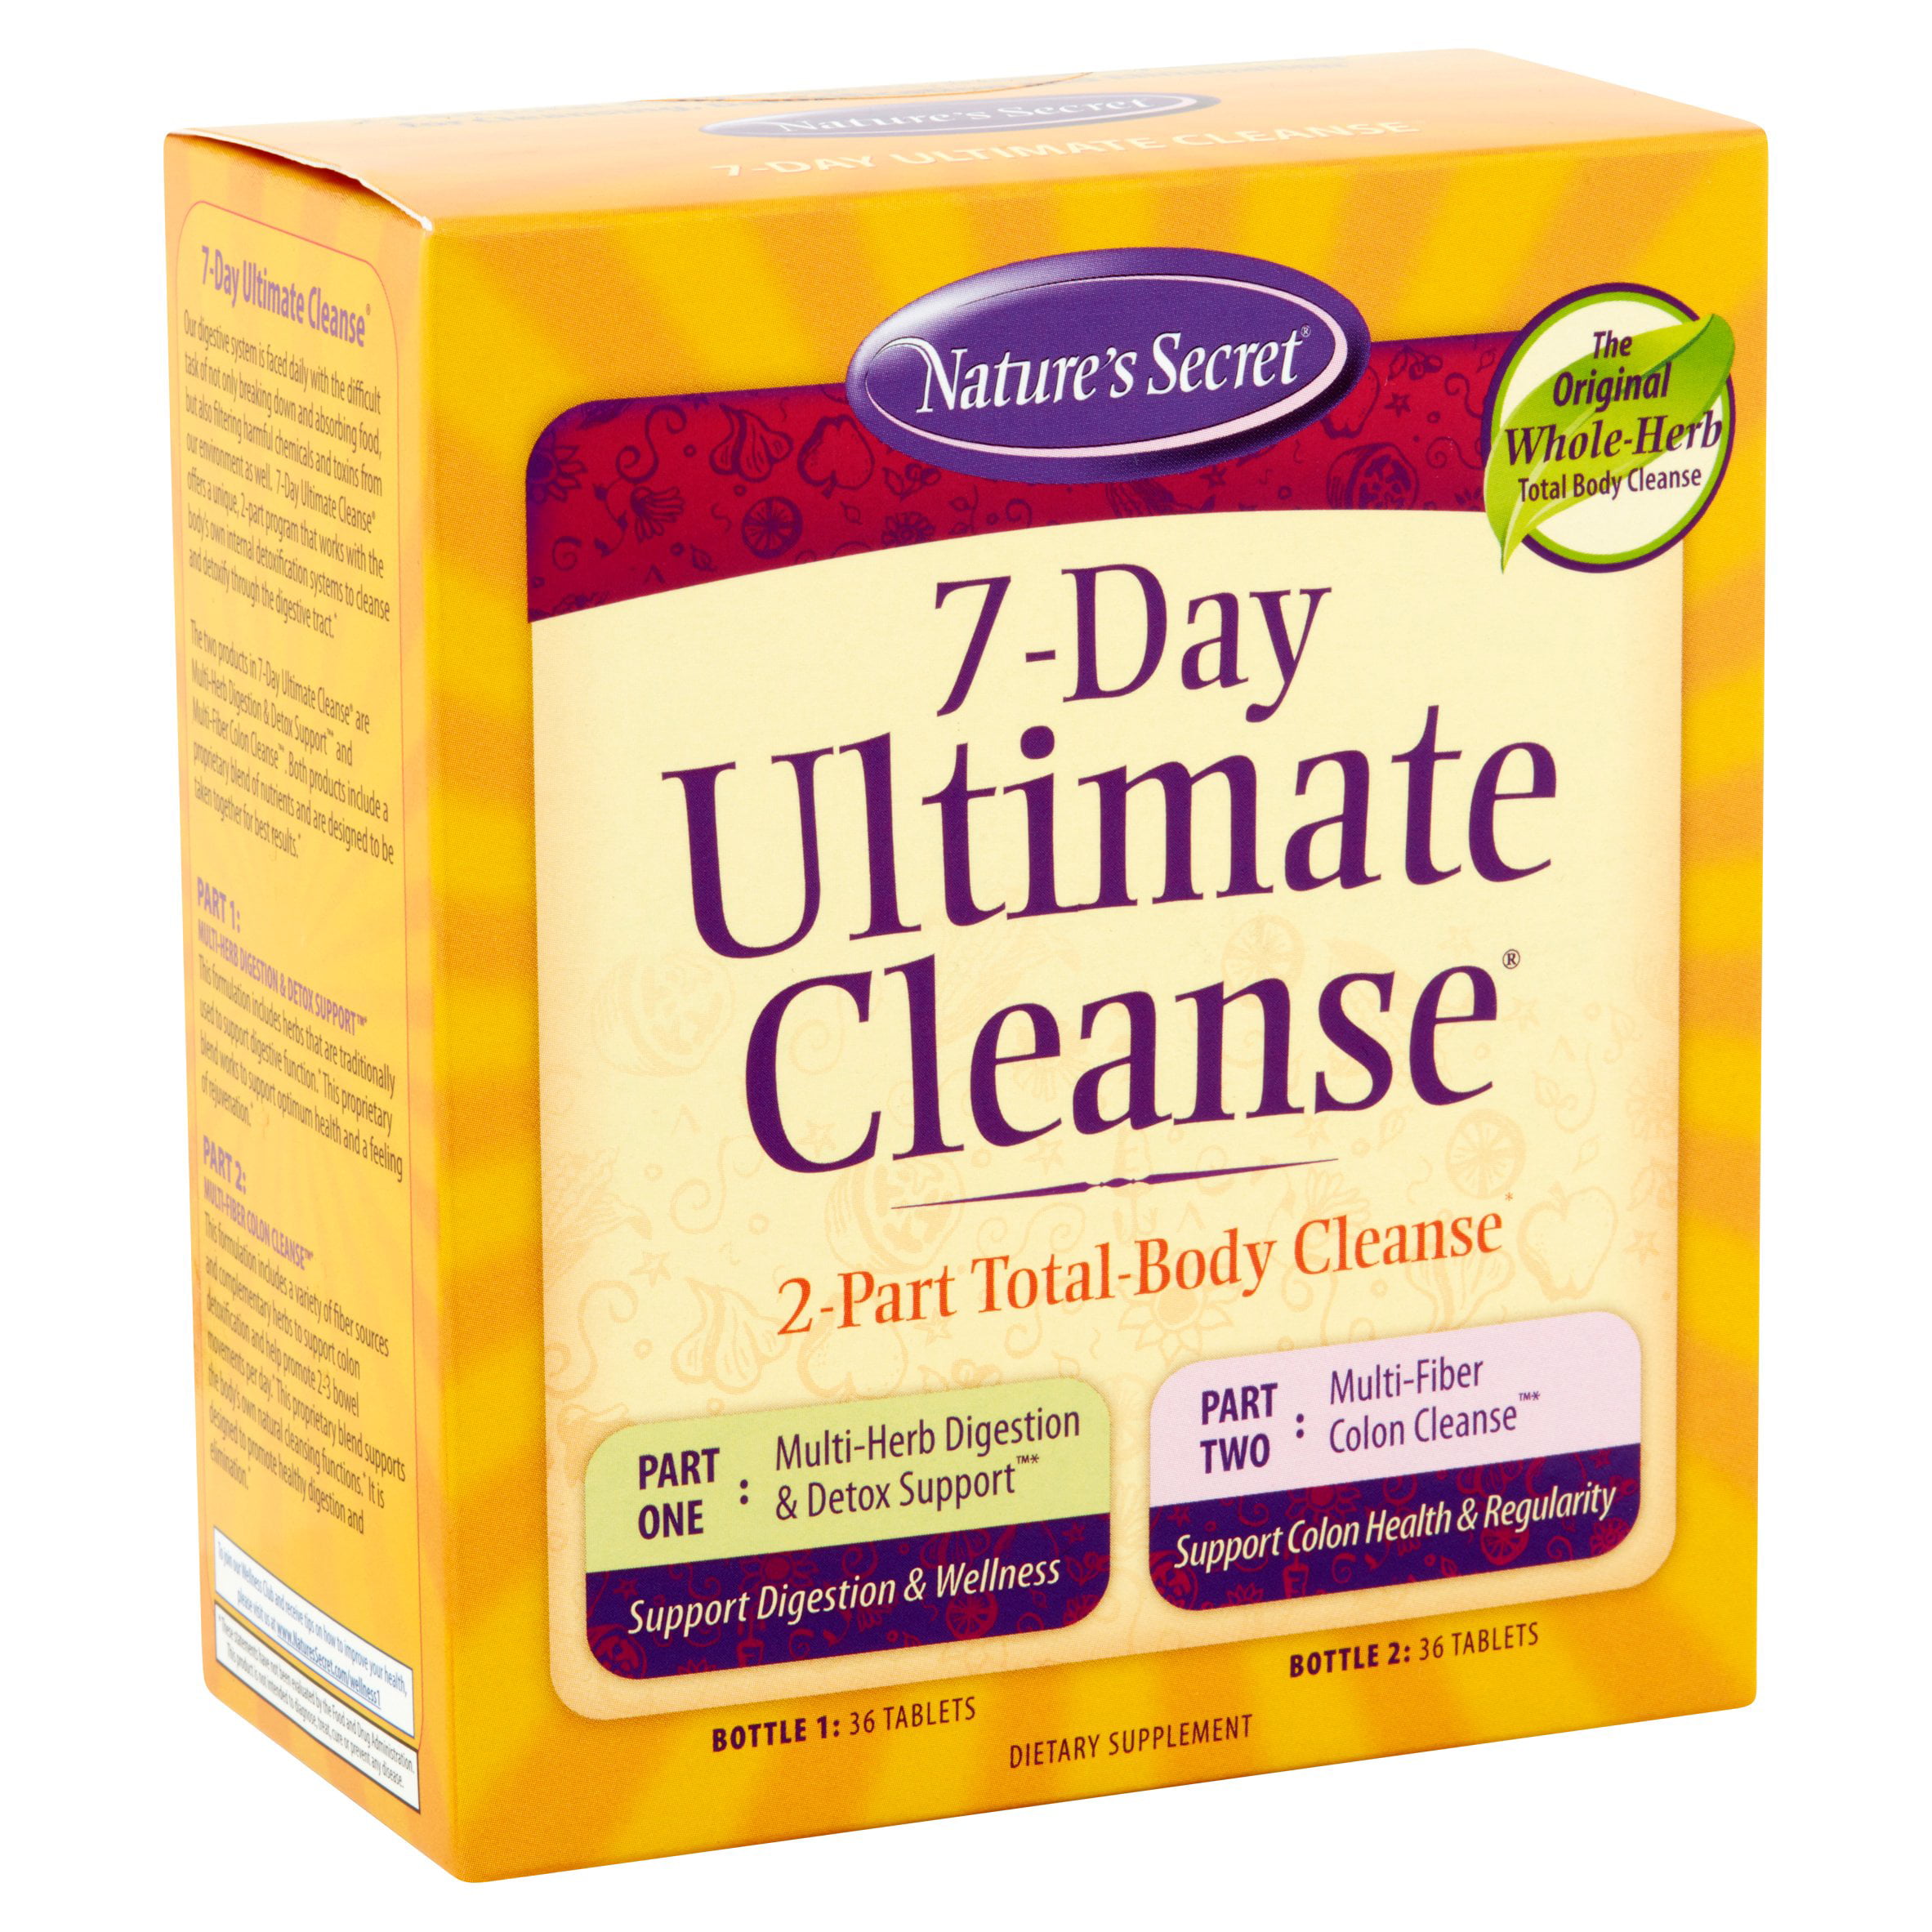 Ultimate Detox Cleanse. Cleanse Day. GNC Cleanse 7 Day. Natural Detox Diet: detailed 7-Day Liver Cleanse Plan.